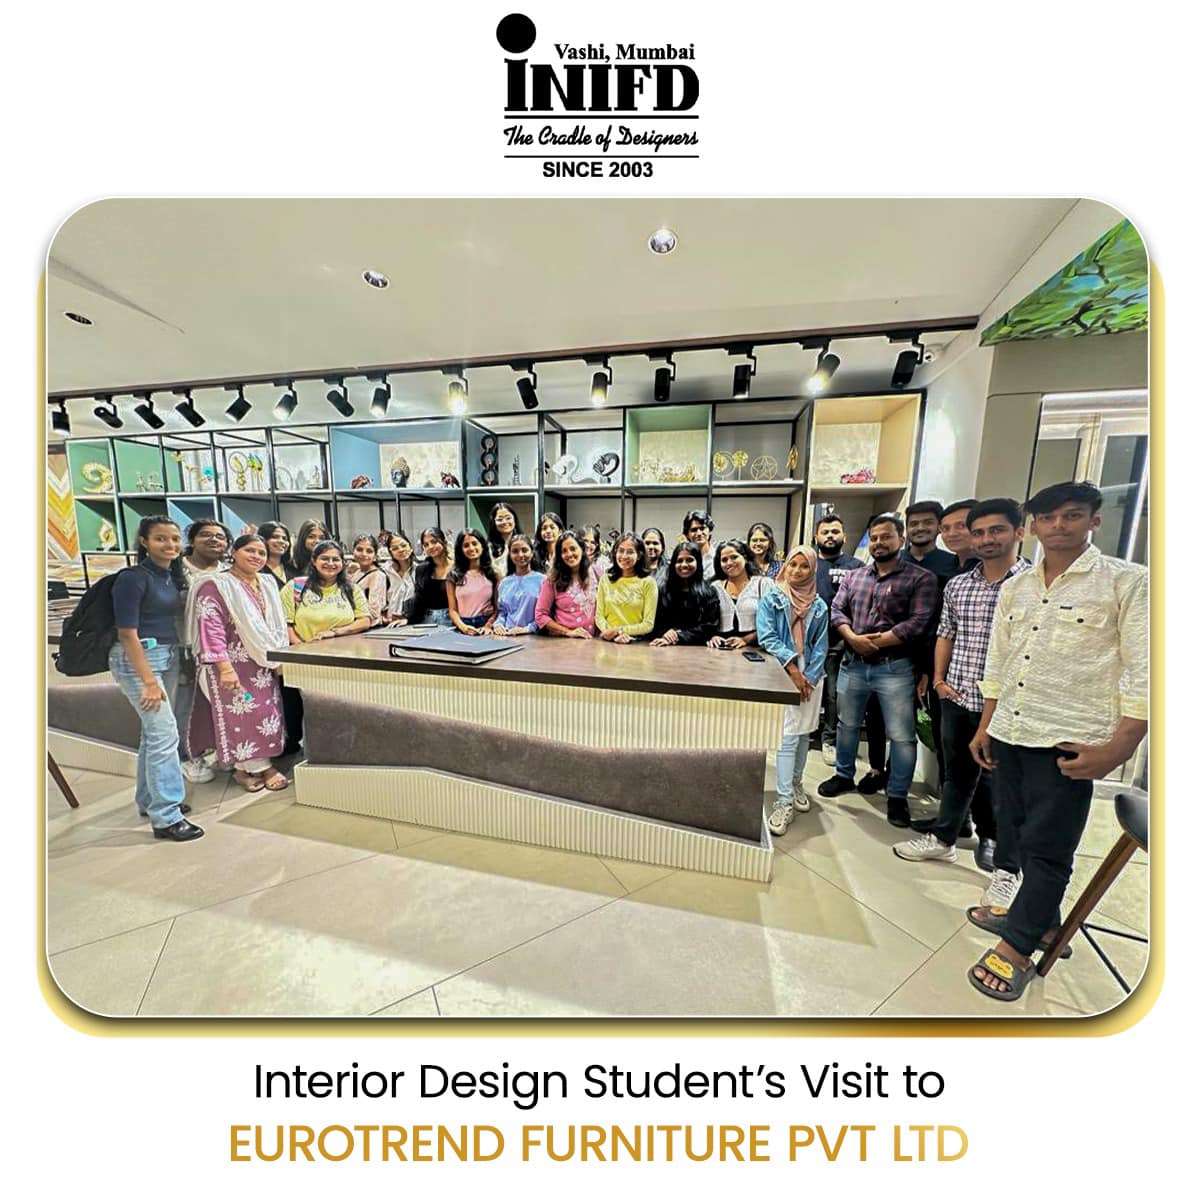 Your Creativity with the Best Interior Design Course in Mumbai - INIFD Vashi